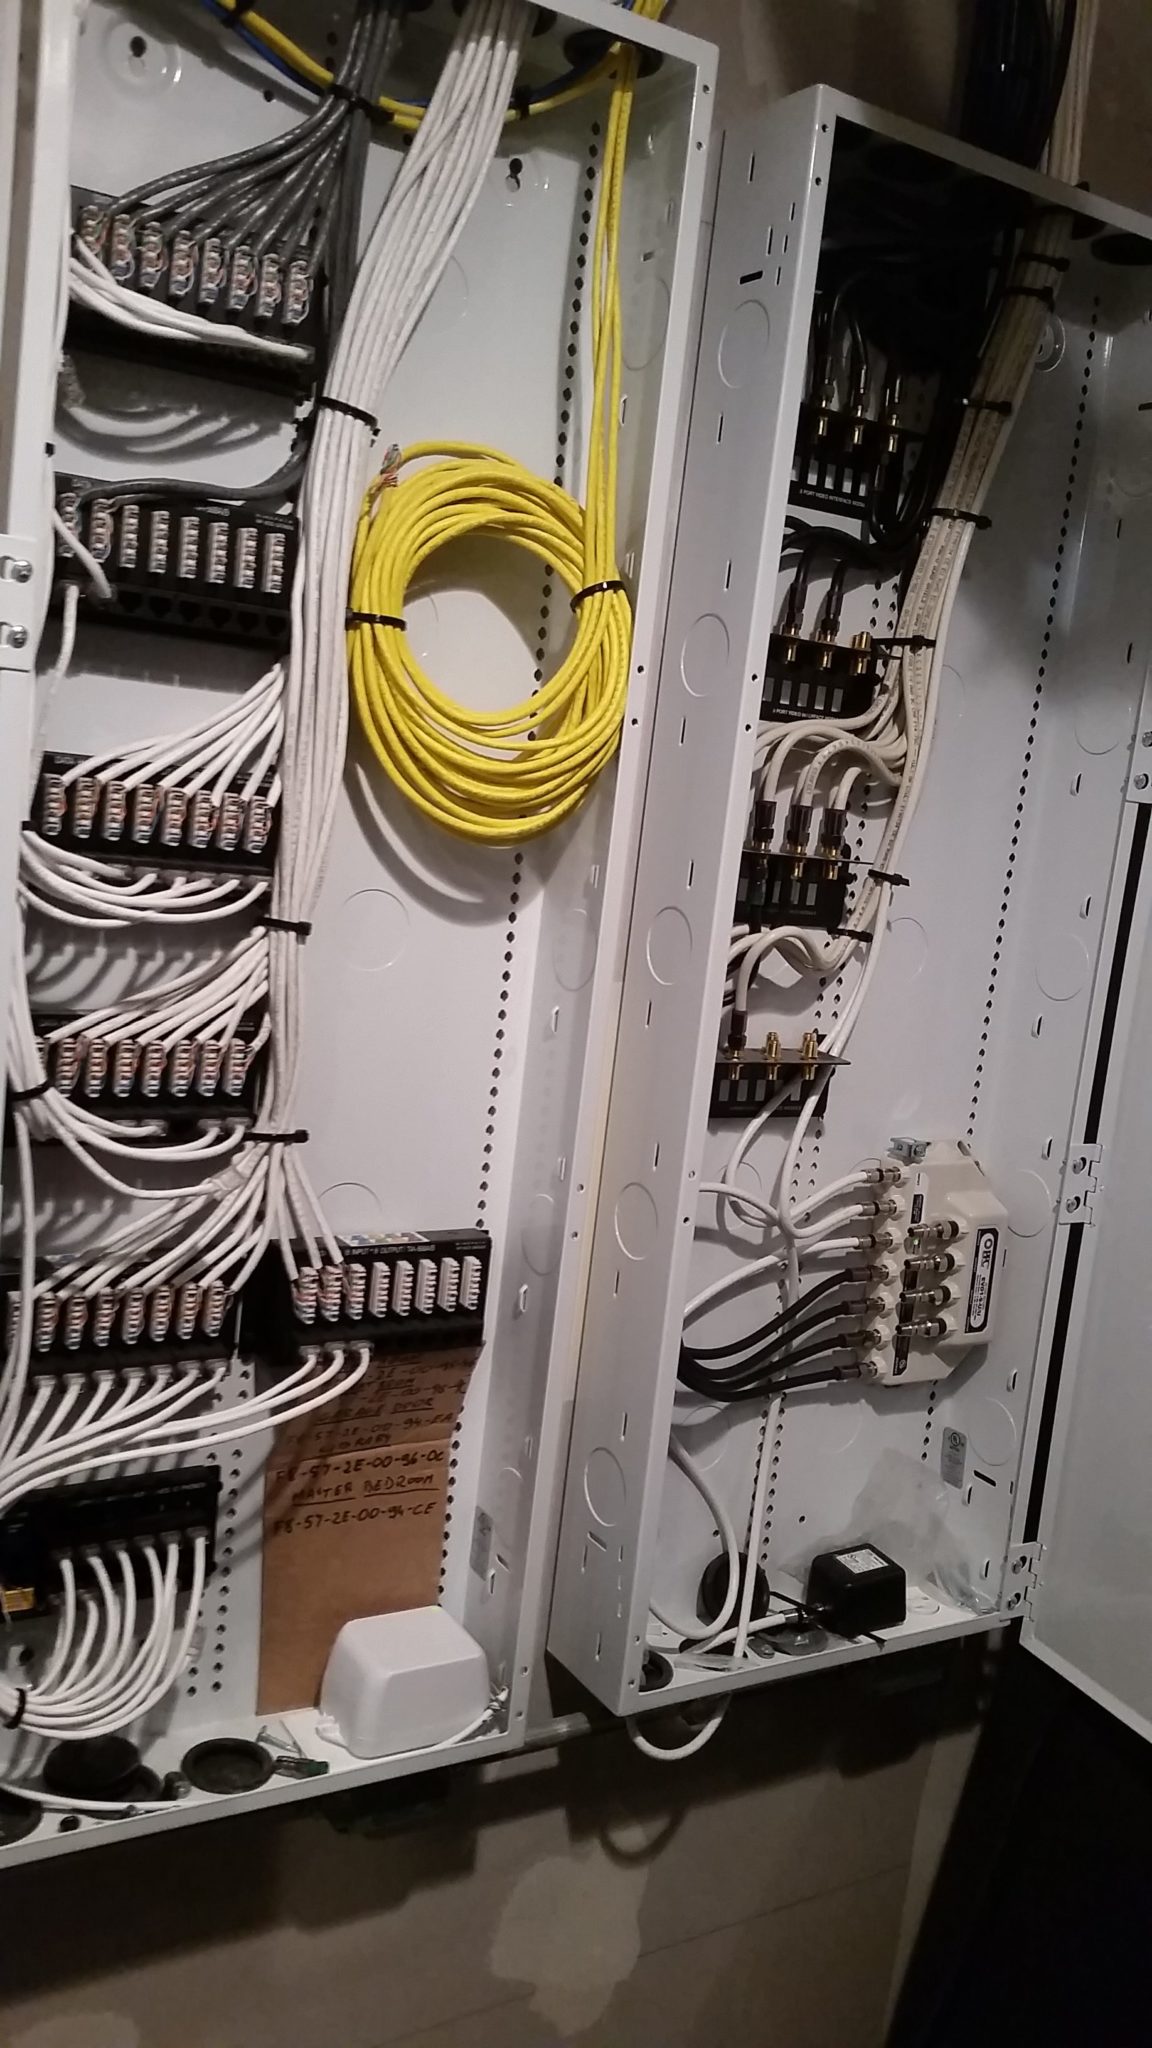 Low Voltage Wiring - How to Wire a Structured Cabling Enclosure